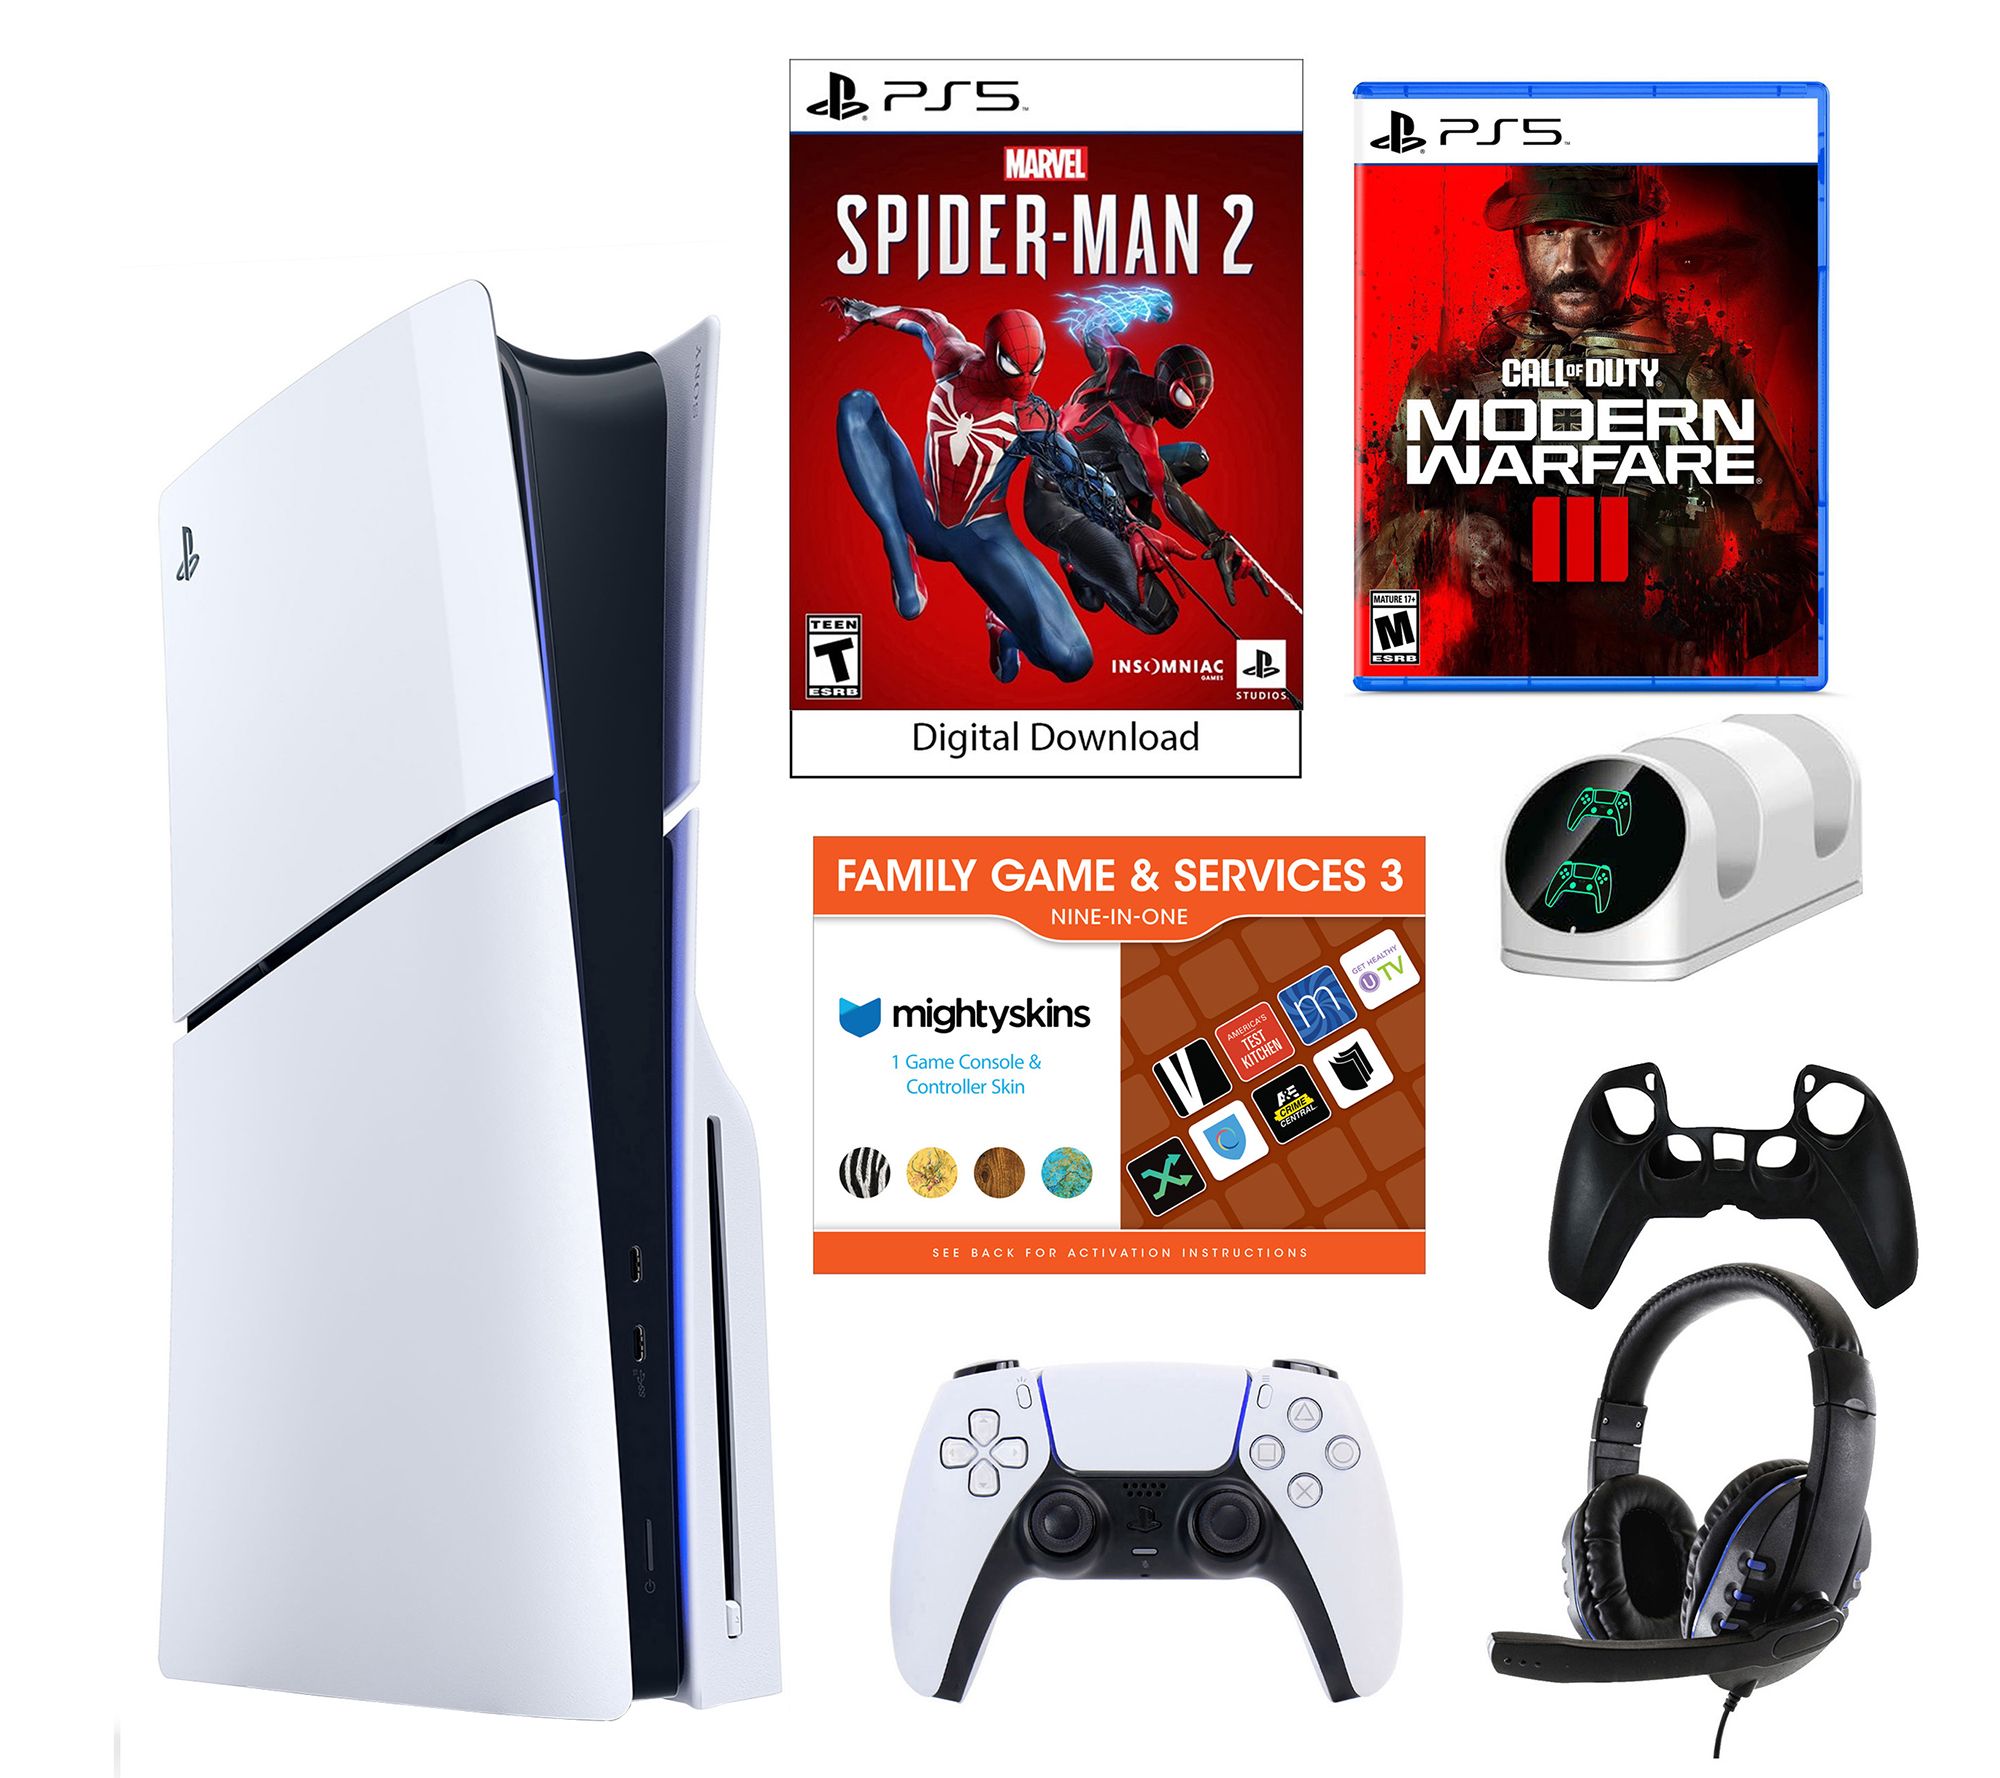 PS5 Spider-Man Miles Morales special edition console is absolutely AMAZING